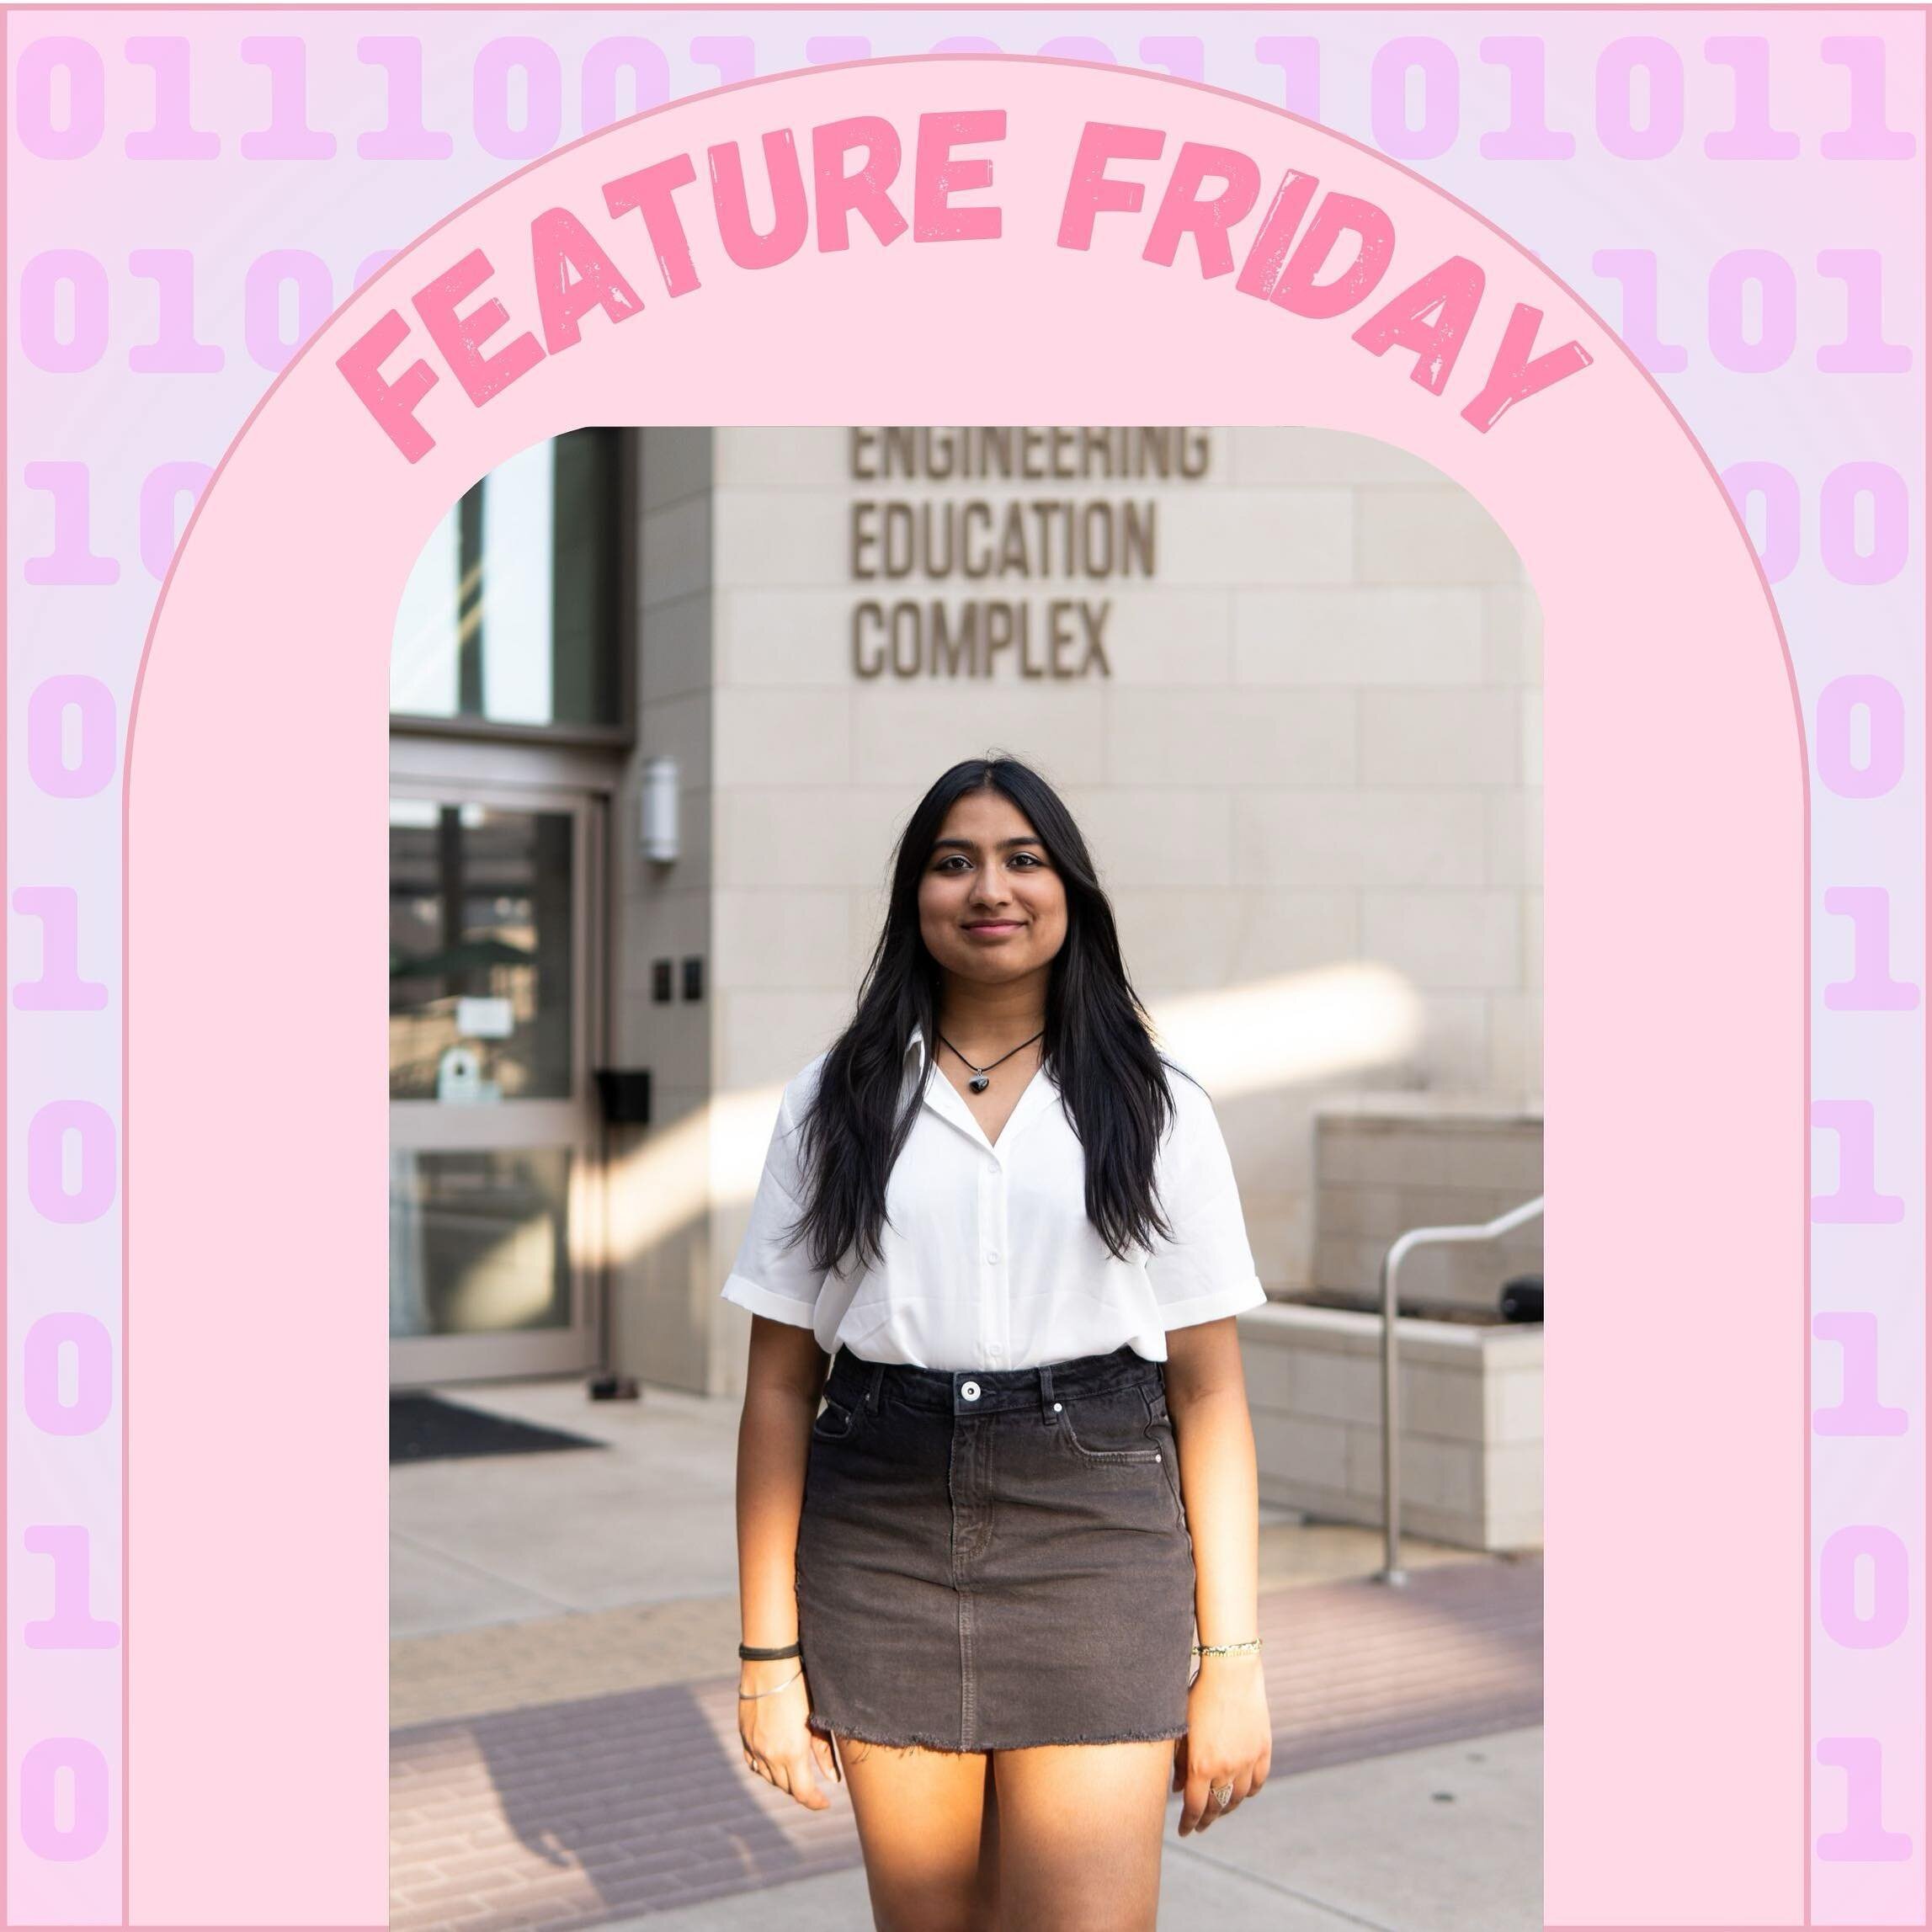 ✨FEATURE FRIDAY✨

Today&rsquo;s Feature Friday is Nishka Mittal!! Nishka is in her junior year as a computer science major. She has been in AWICS for 2 years and currently serves as our Corporate Outreach Officer. Over the summer, Nishka will be inte